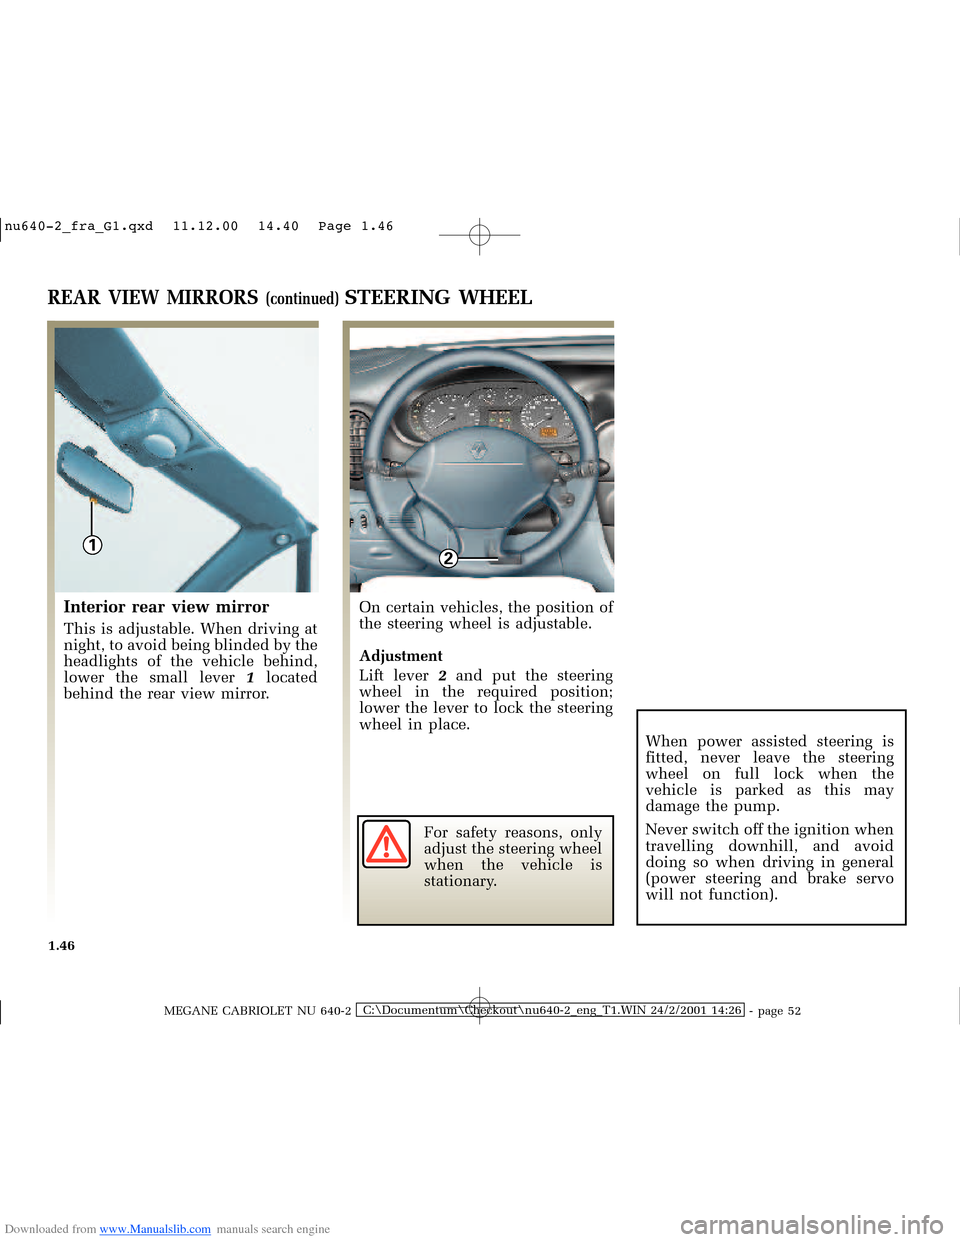 RENAULT MEGANE 2000 X64 / 1.G Owners Manual Downloaded from www.Manualslib.com manuals search engine 12
�Q�X������B�I�U�D�B�*���T�[�G� � ��������� � ������ � �3�D�J�H� ����
MEGANE CABRIOLET NU 640-2C:\Documentum\C